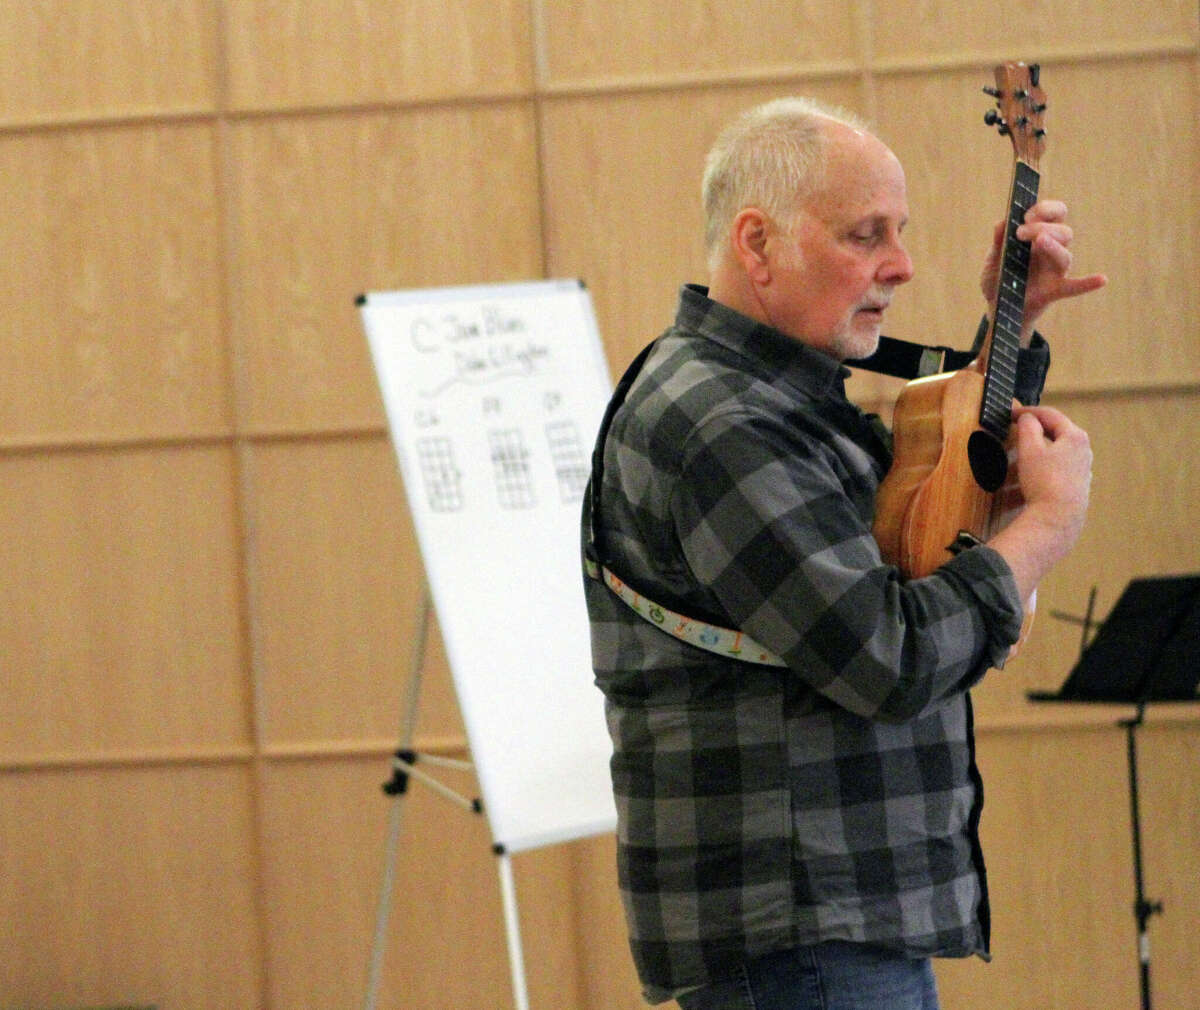 The Ukulele Trio held a ukulele workshop at Immanuel Lutheran Church as part of a previous Big Rapids Festival of the Arts